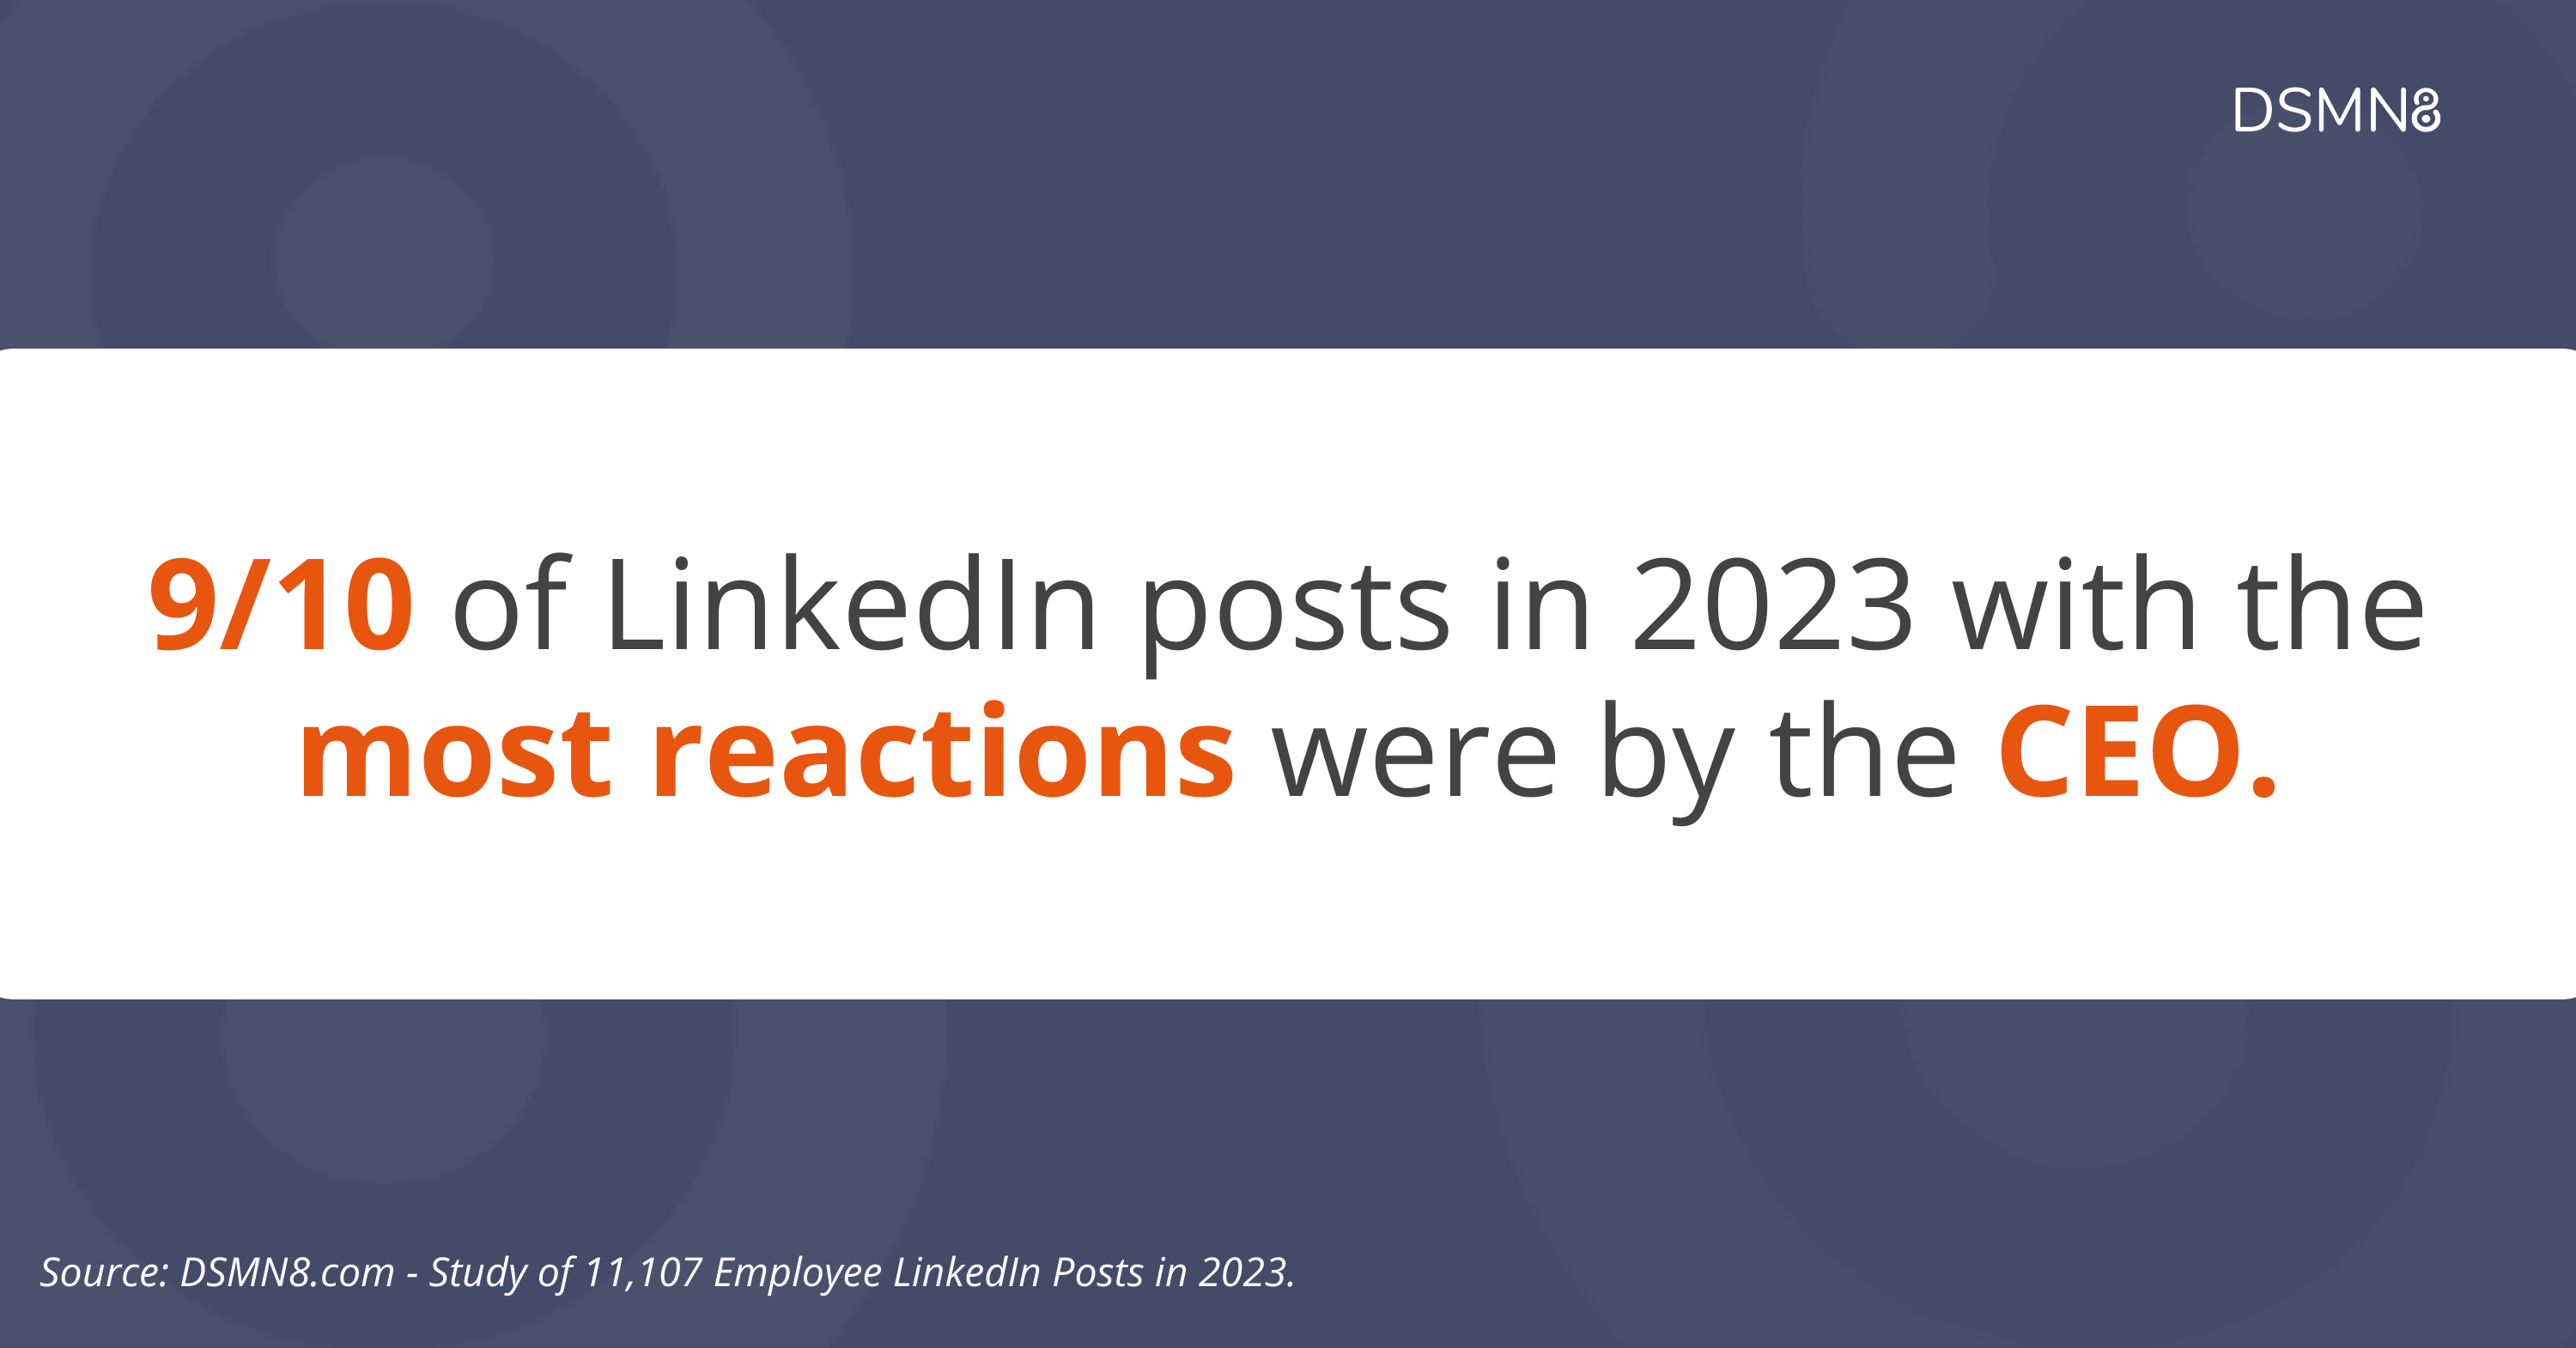 9/10 of LinkedIn posts in 2023 with the most reactions were by the CEO.